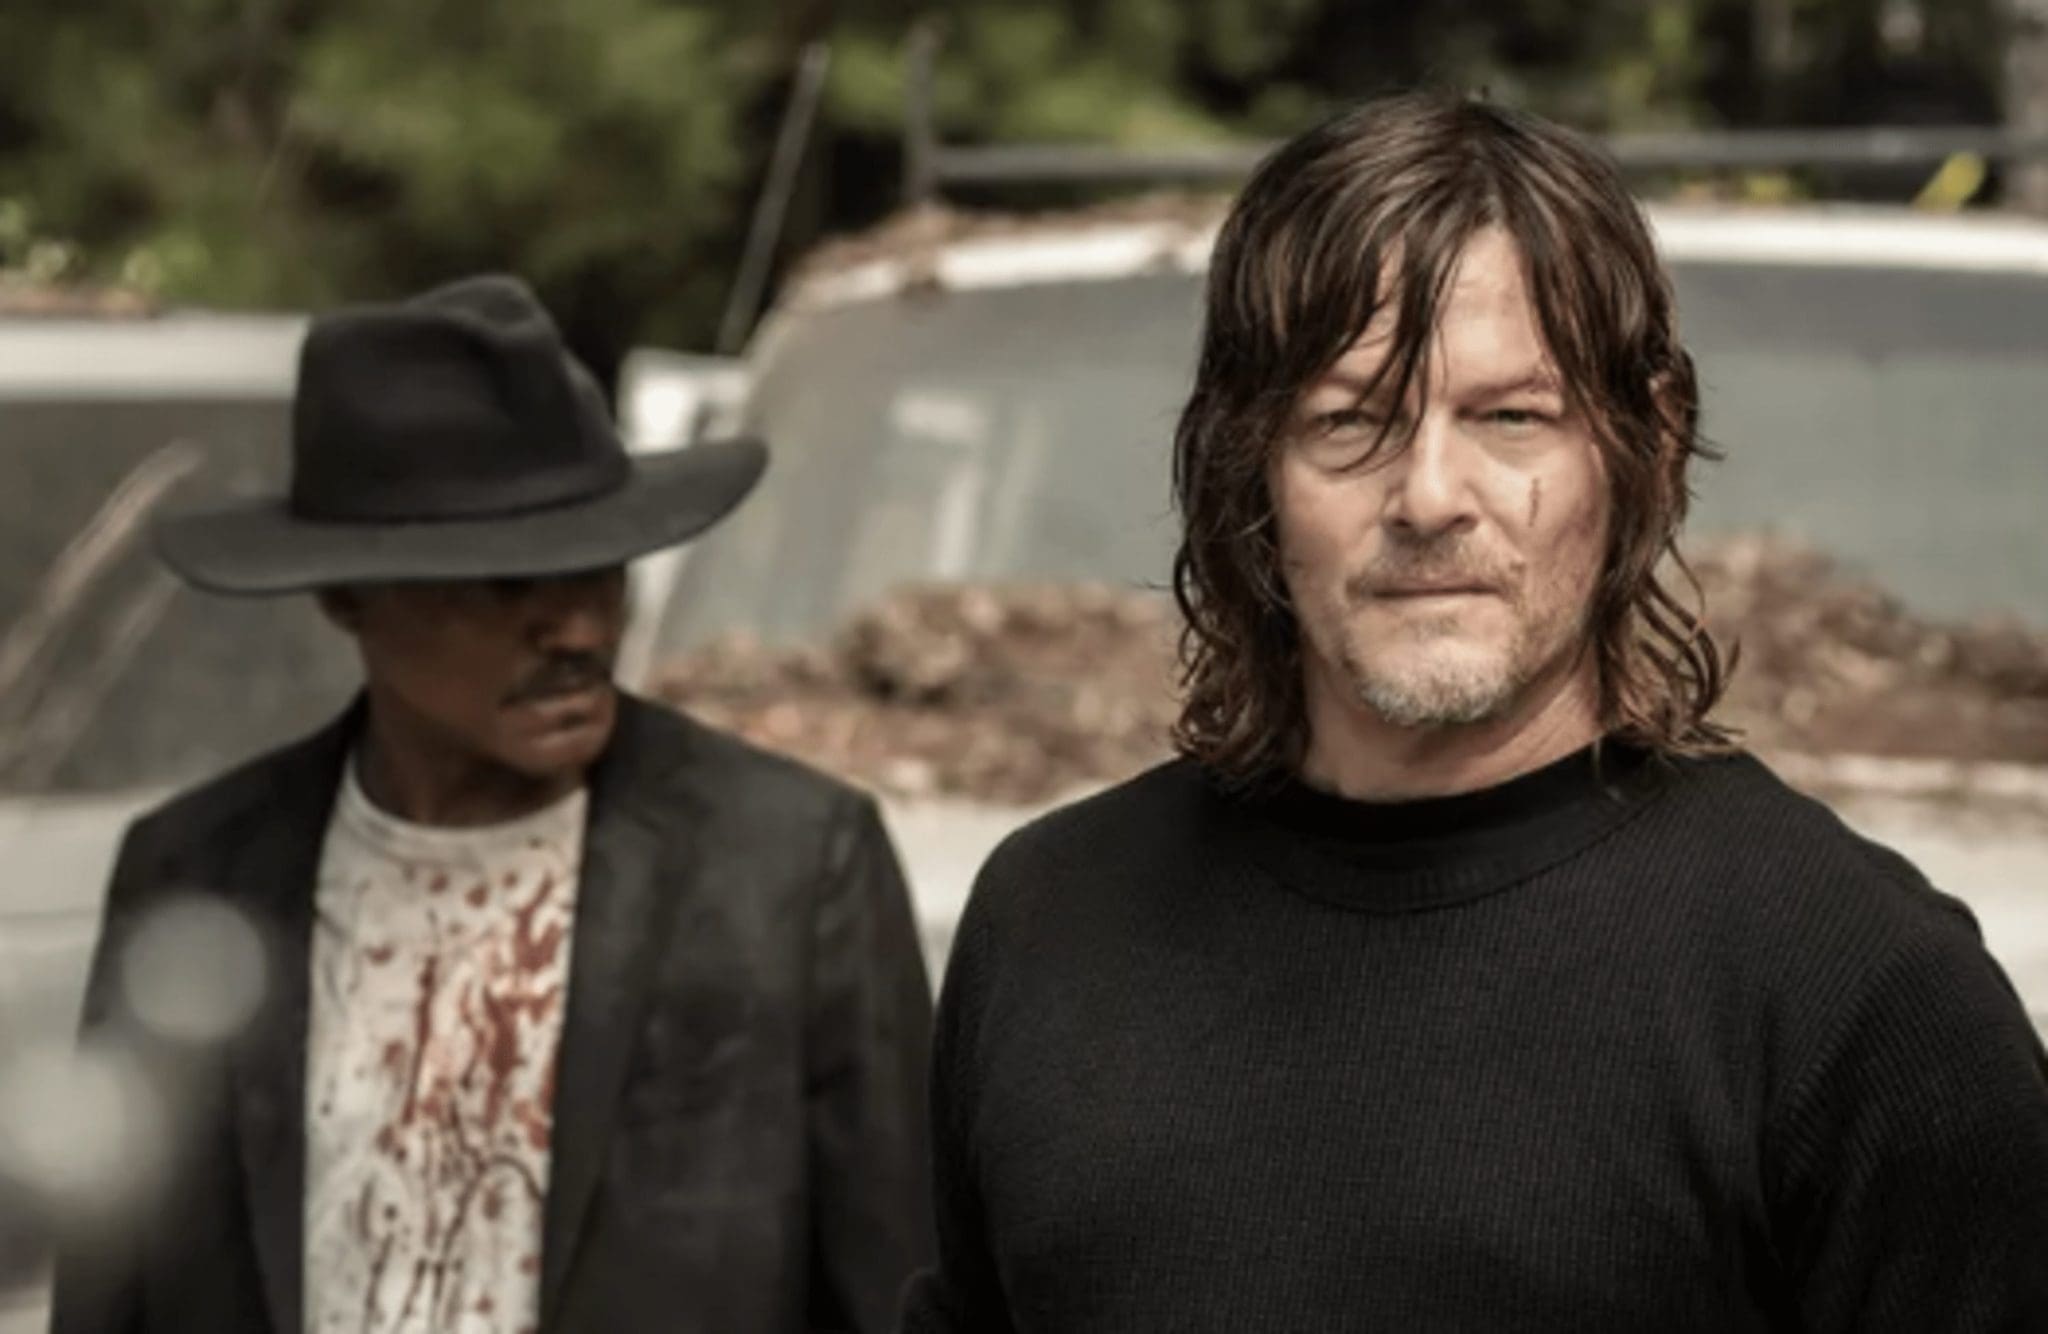 Following a terrifying set injury, Norman Reedus of The Walking Dead believed he was going to accept death